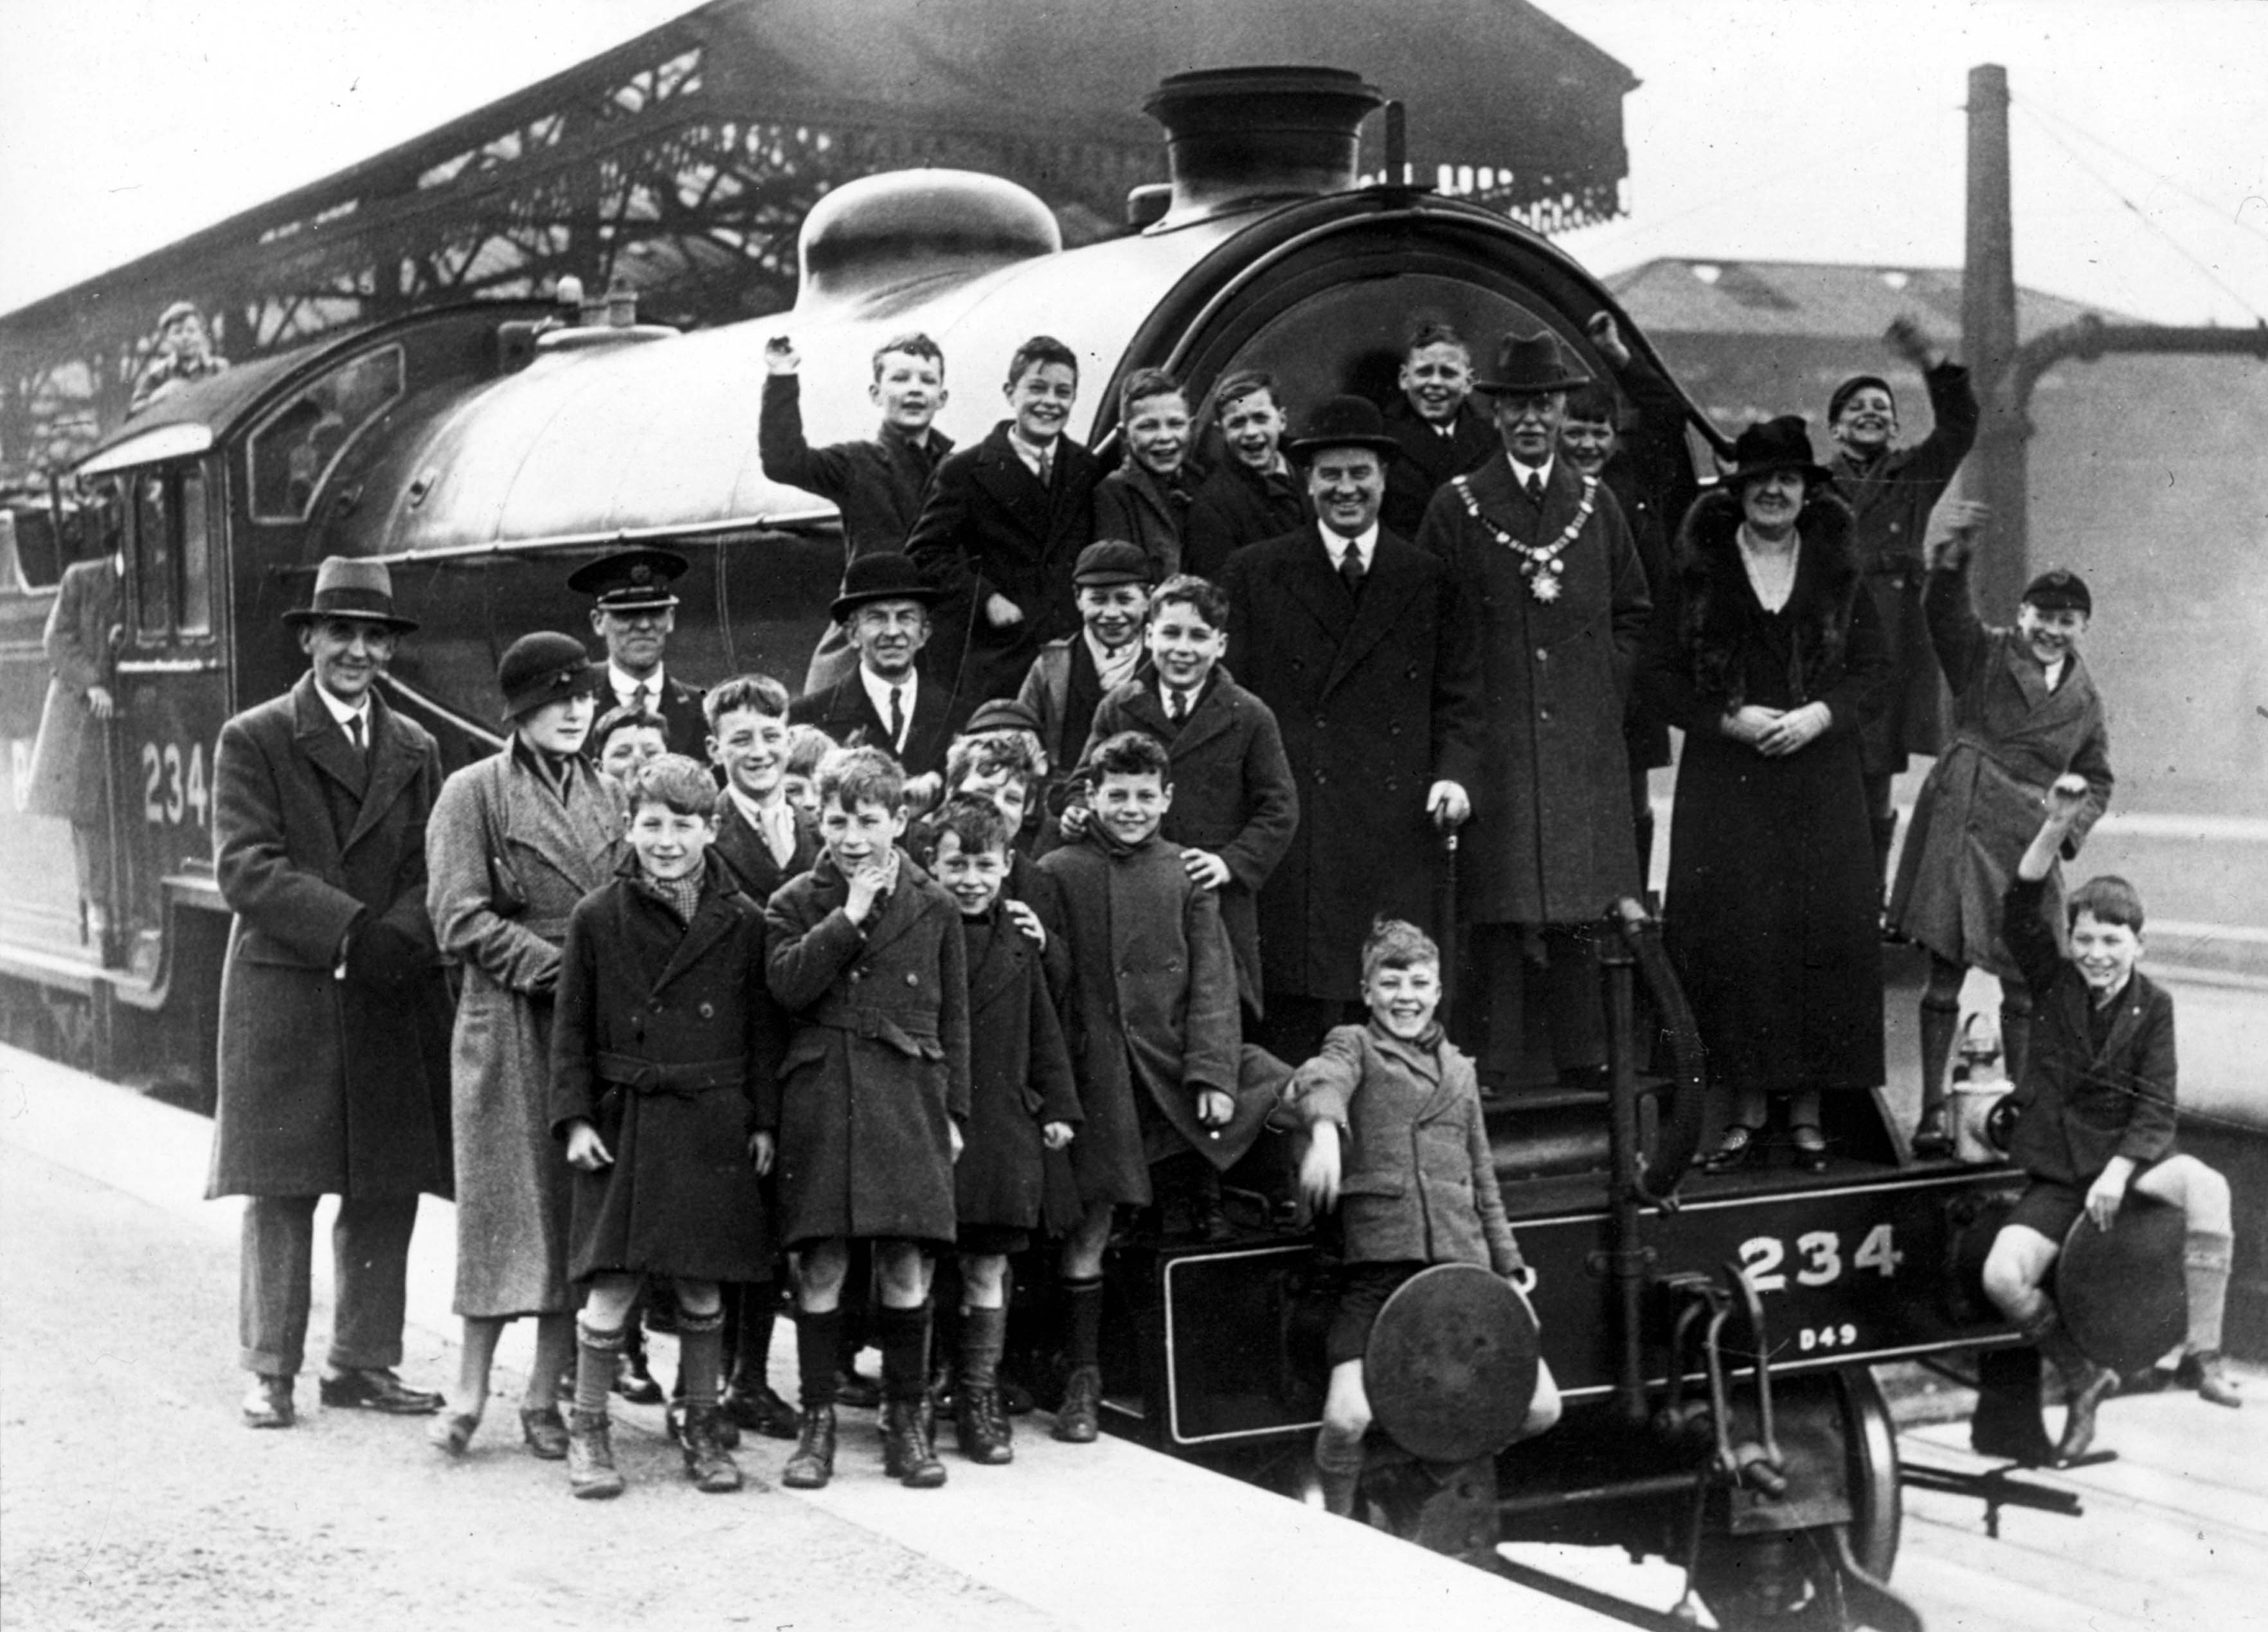 An old photo of a group of people with a stream train